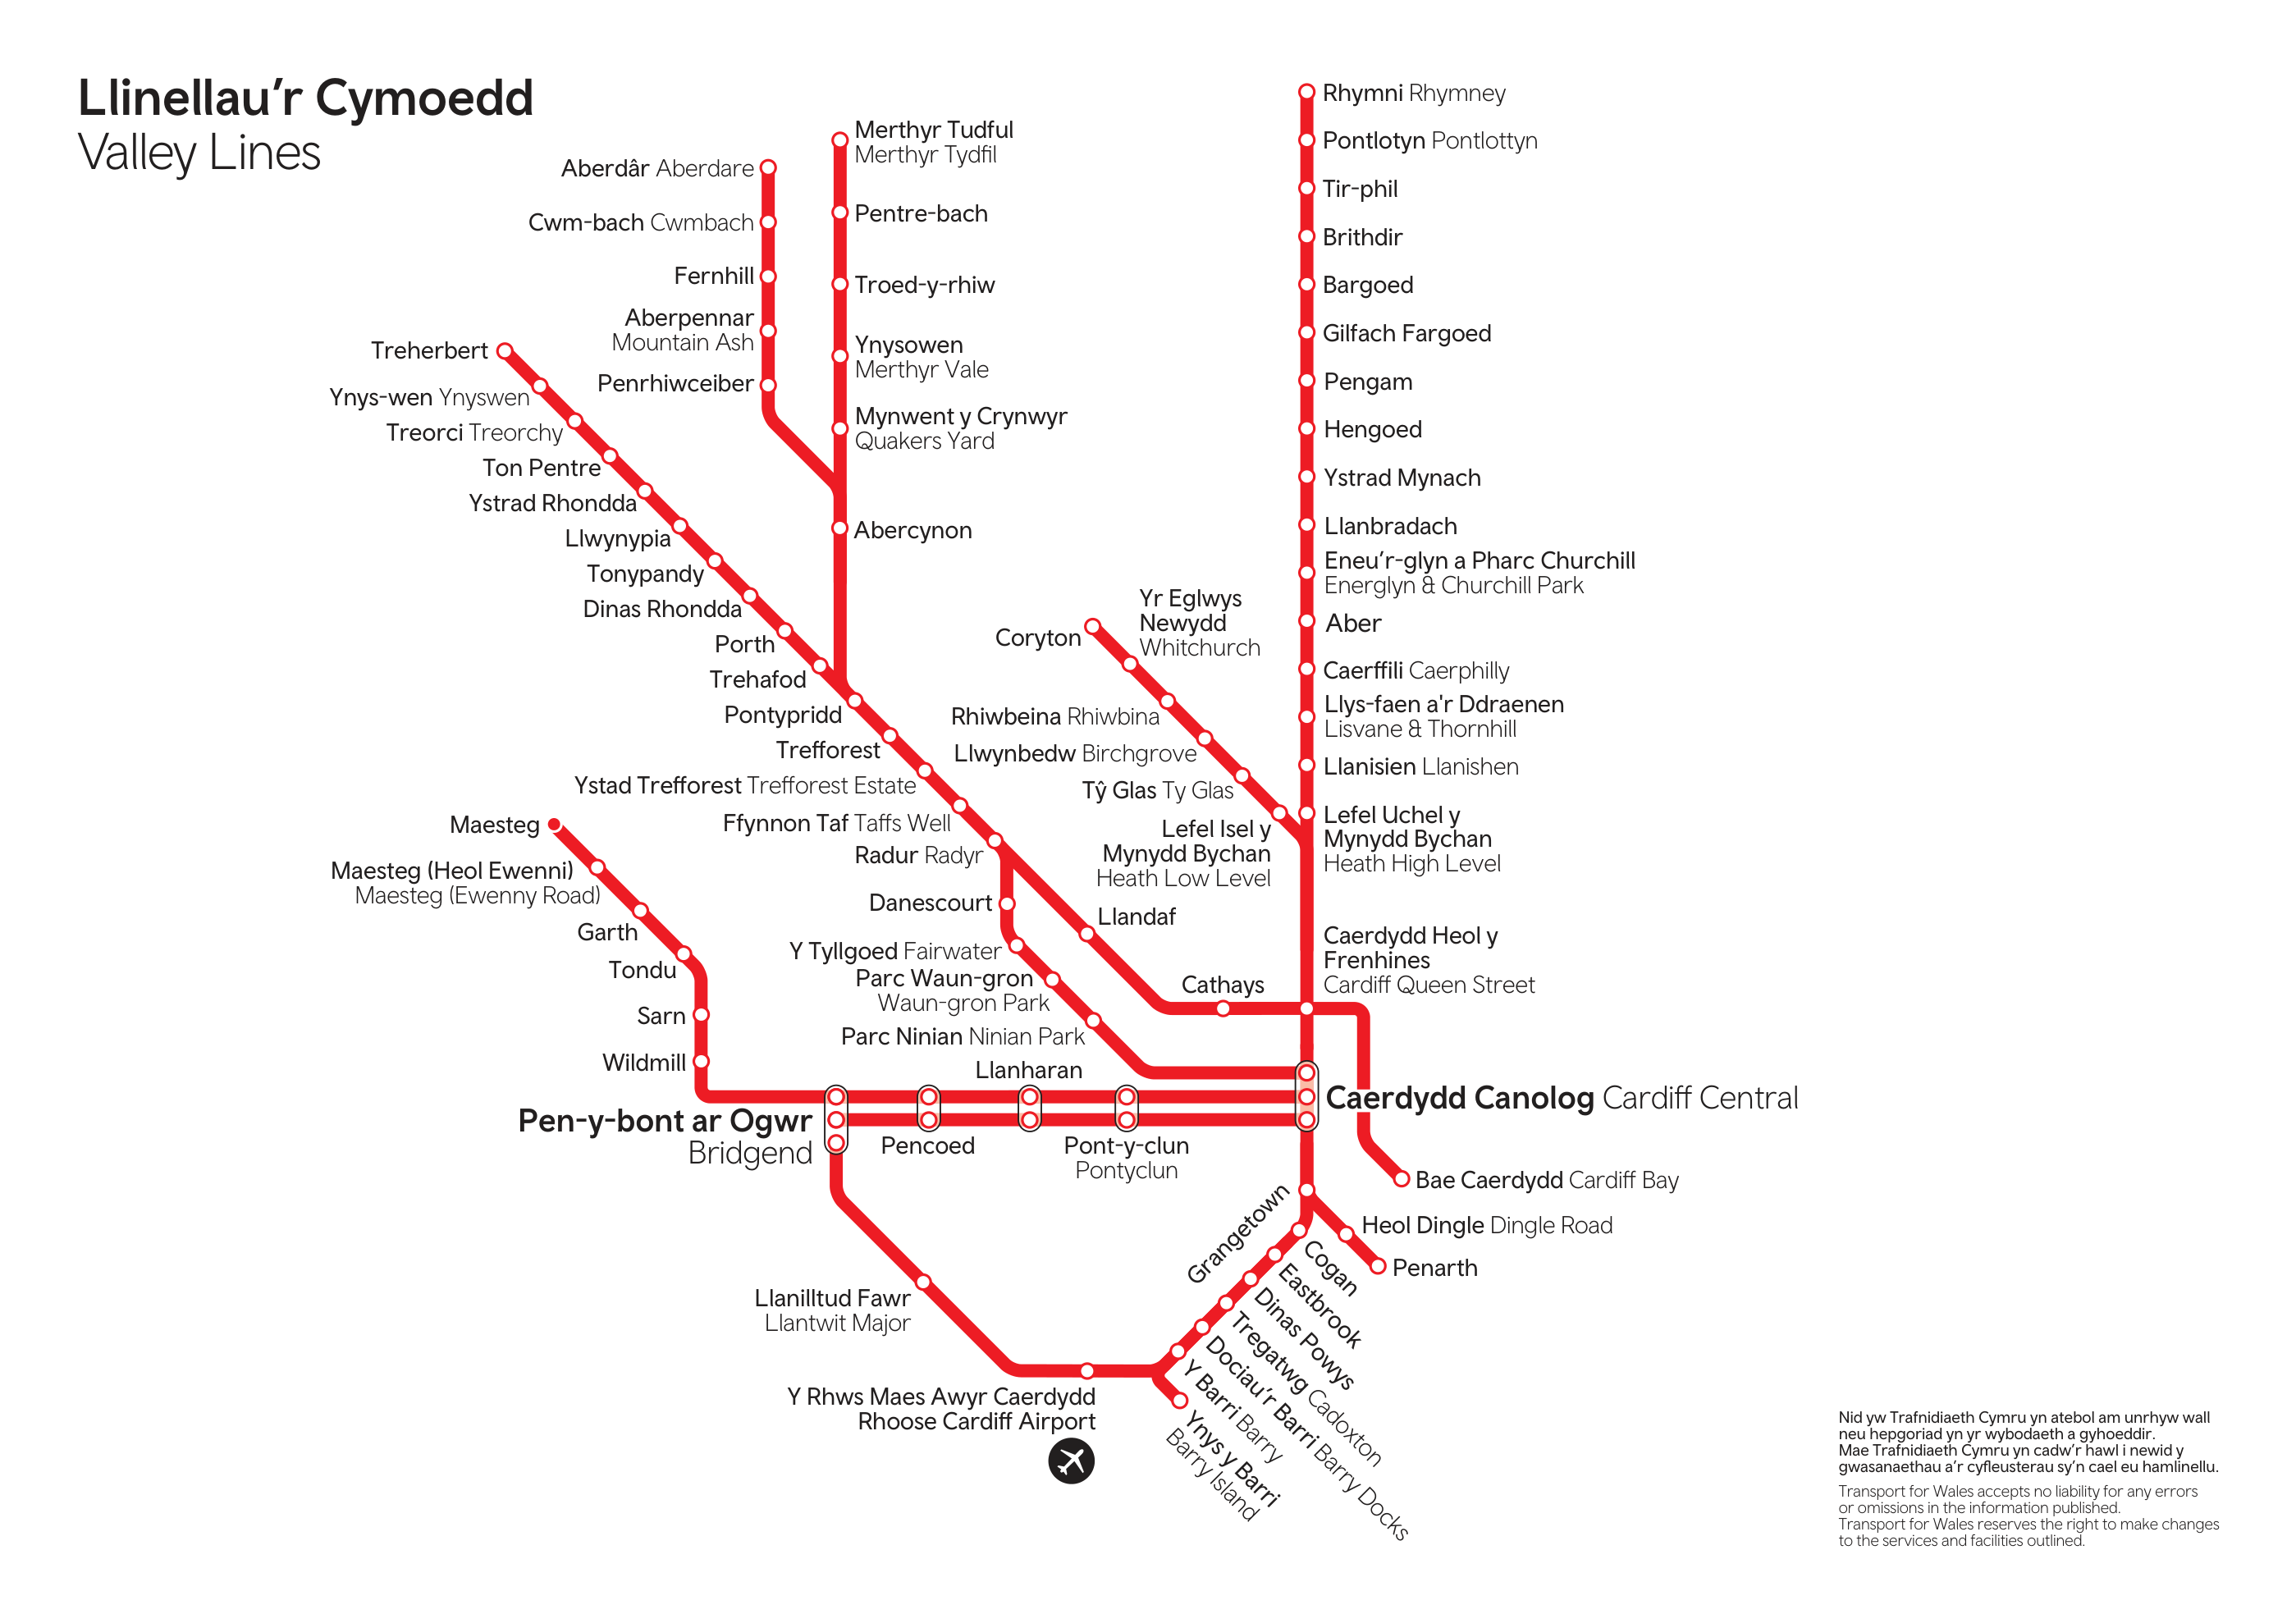 Transport for Wales Valley Lines